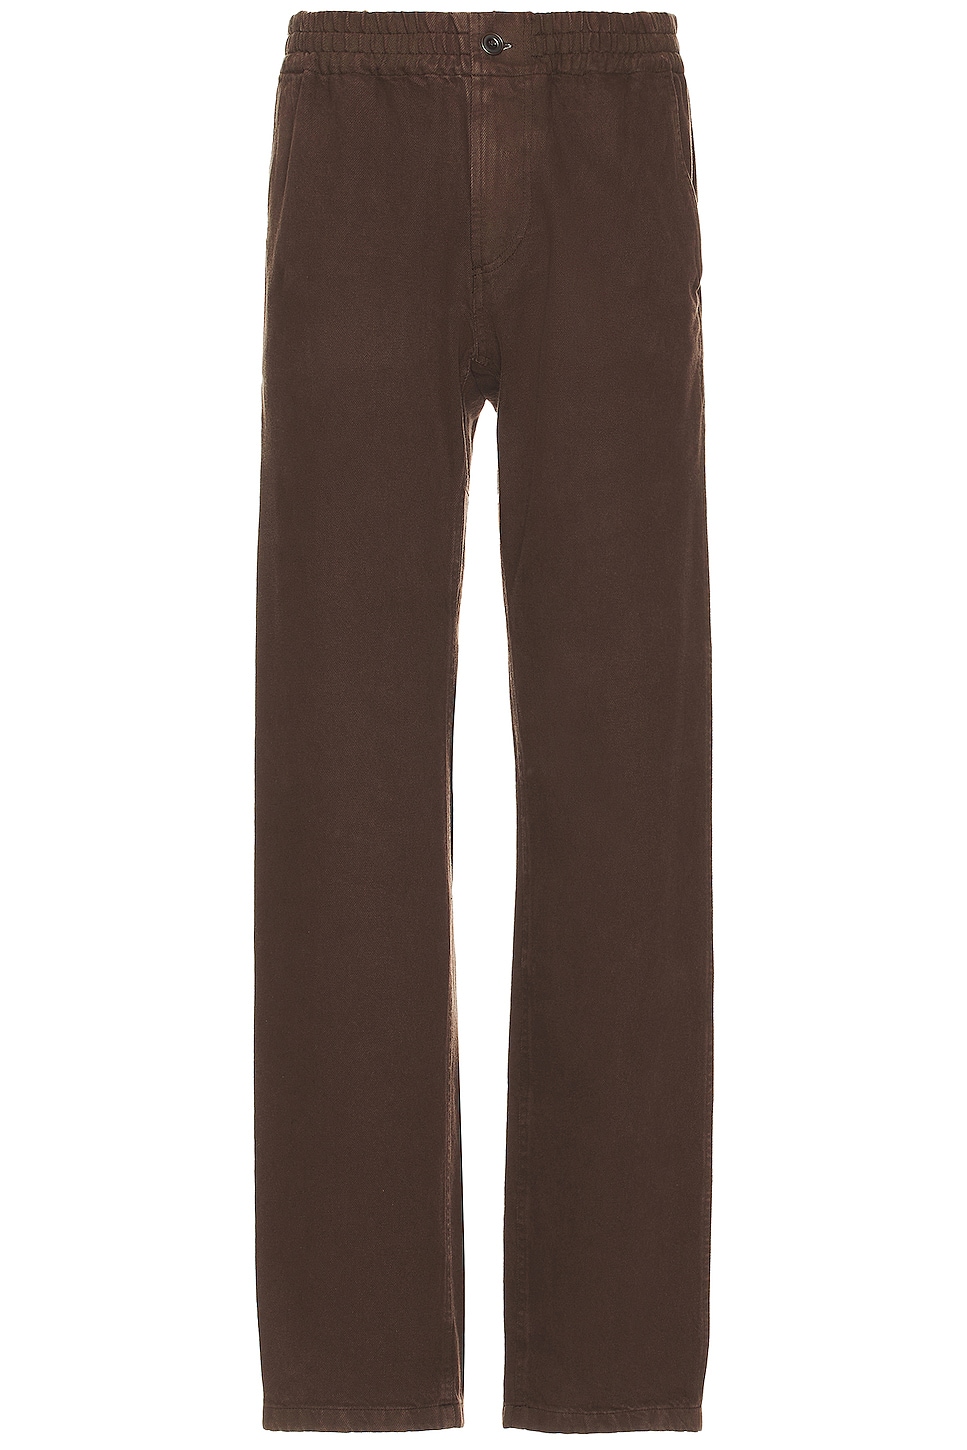 Image 1 of A.P.C. Chuck Pant in Brown